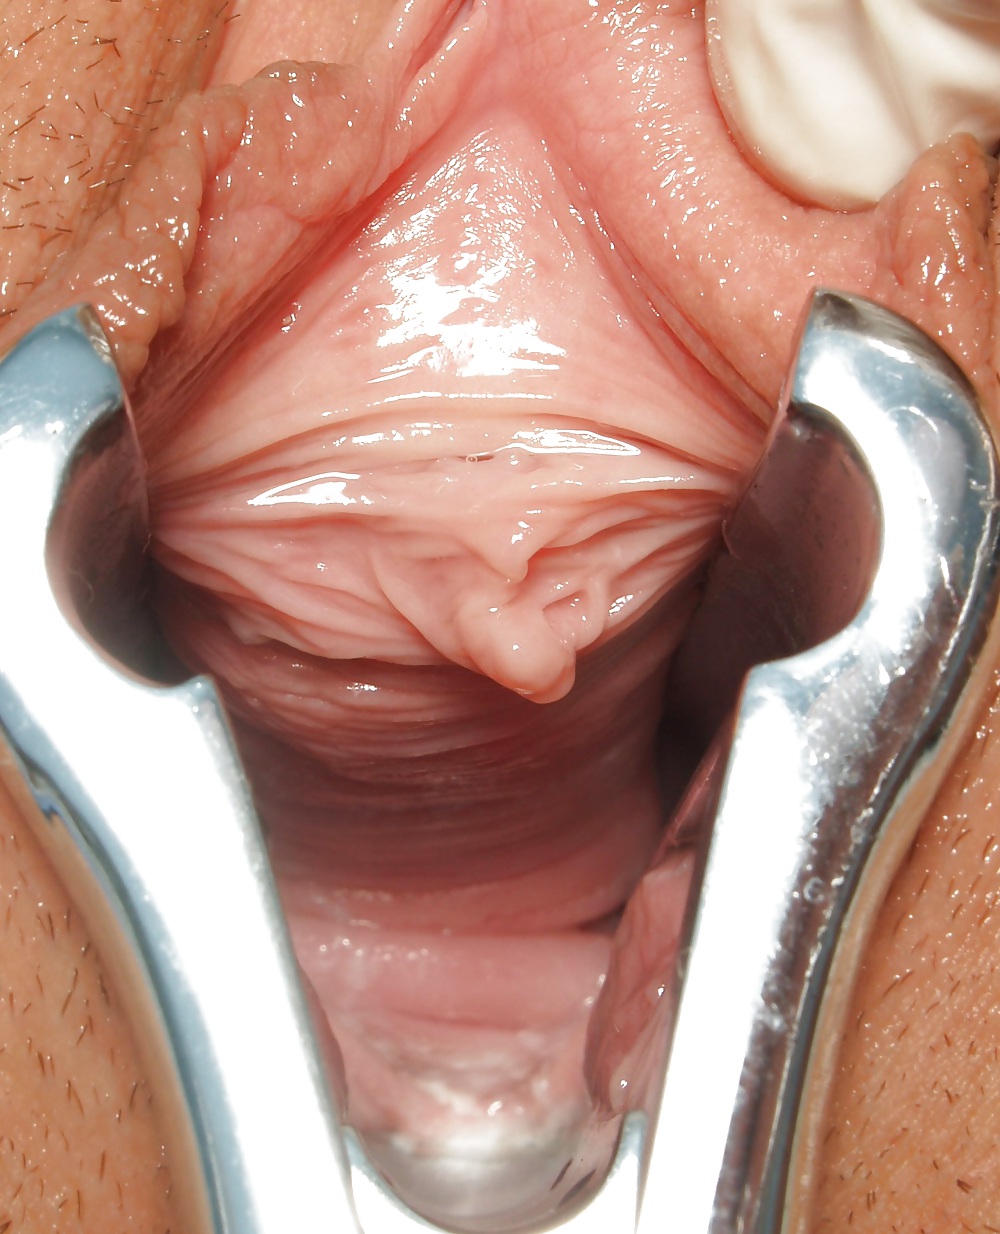 Speculum View in a pussy #6424545